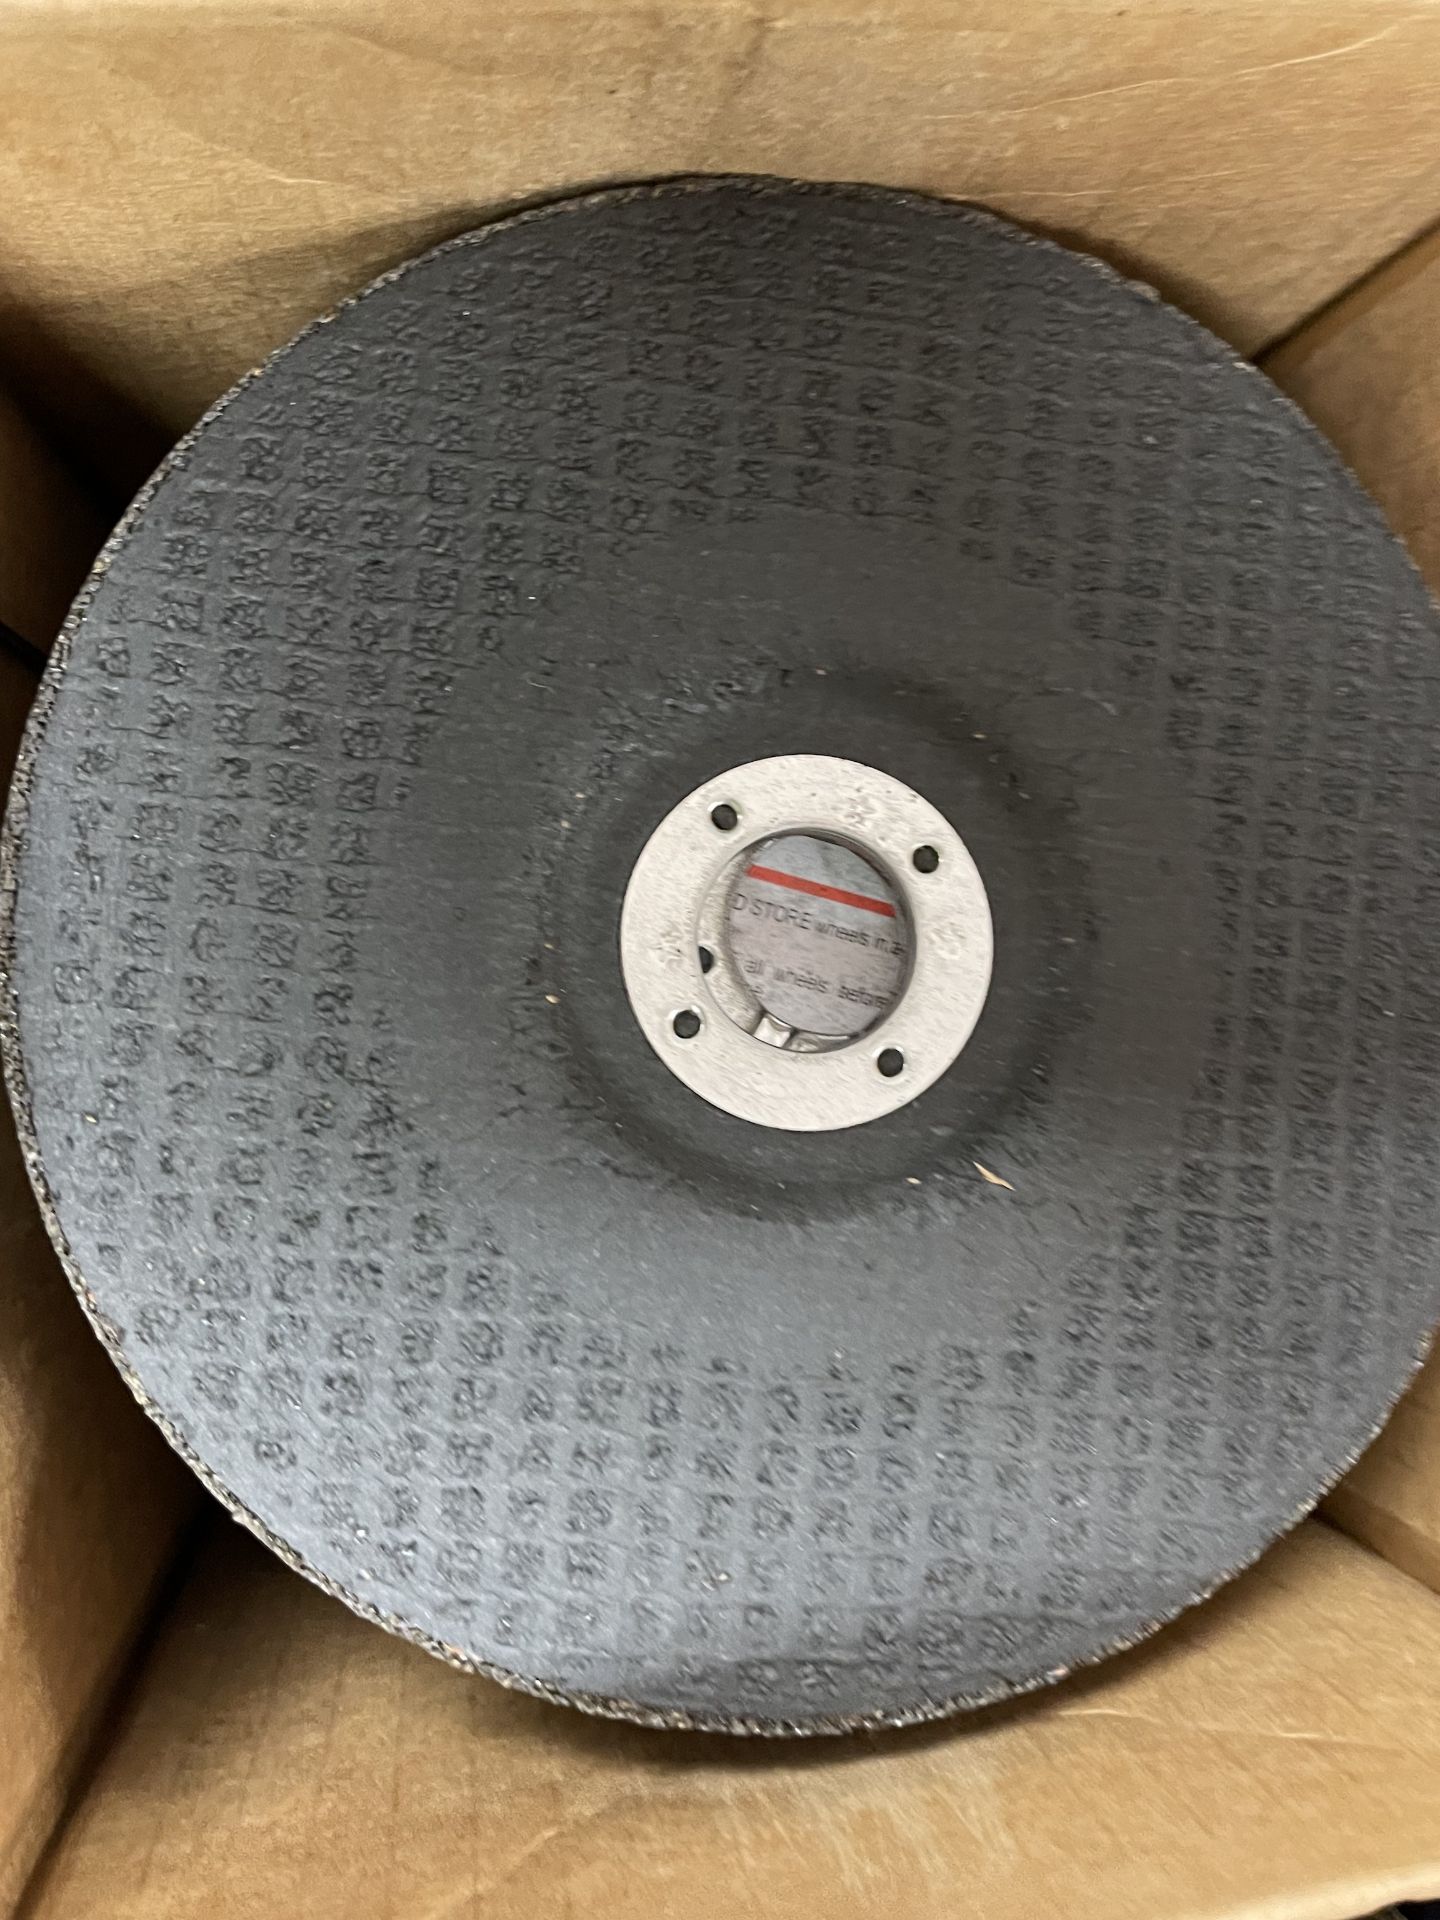 Lot of Brand New Type 27 Depressed Center Grinding Wheels - Upland - Image 5 of 7